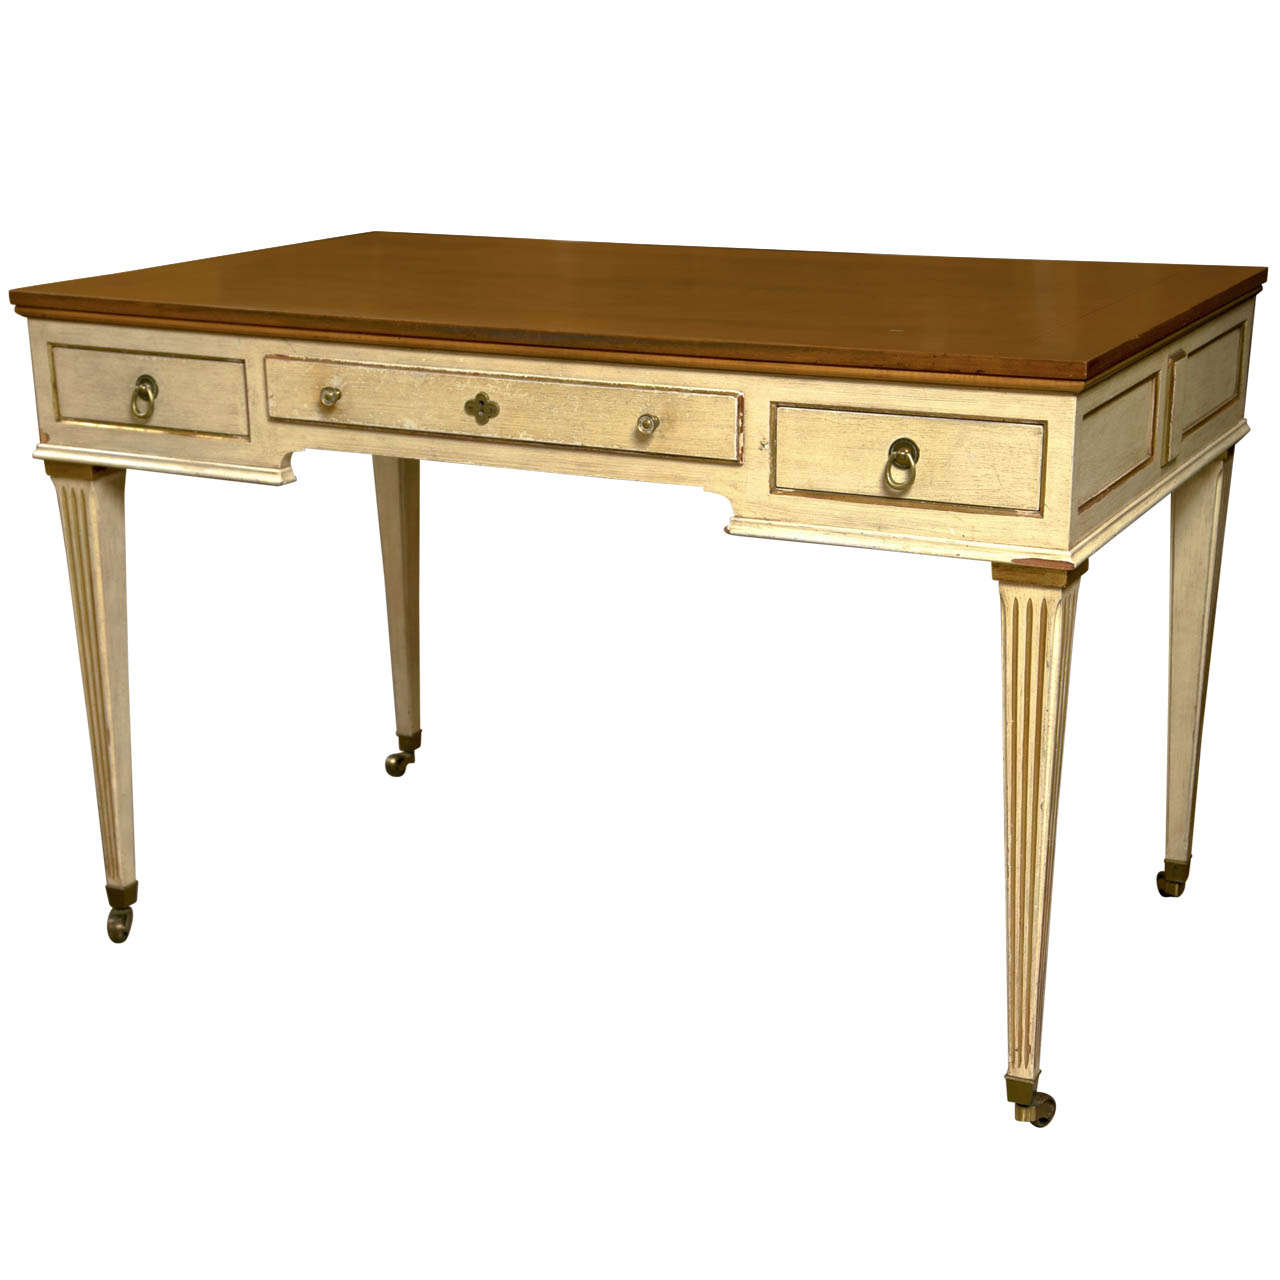 French Directoire Style Painted Desk By John Widdicomb For Sale At